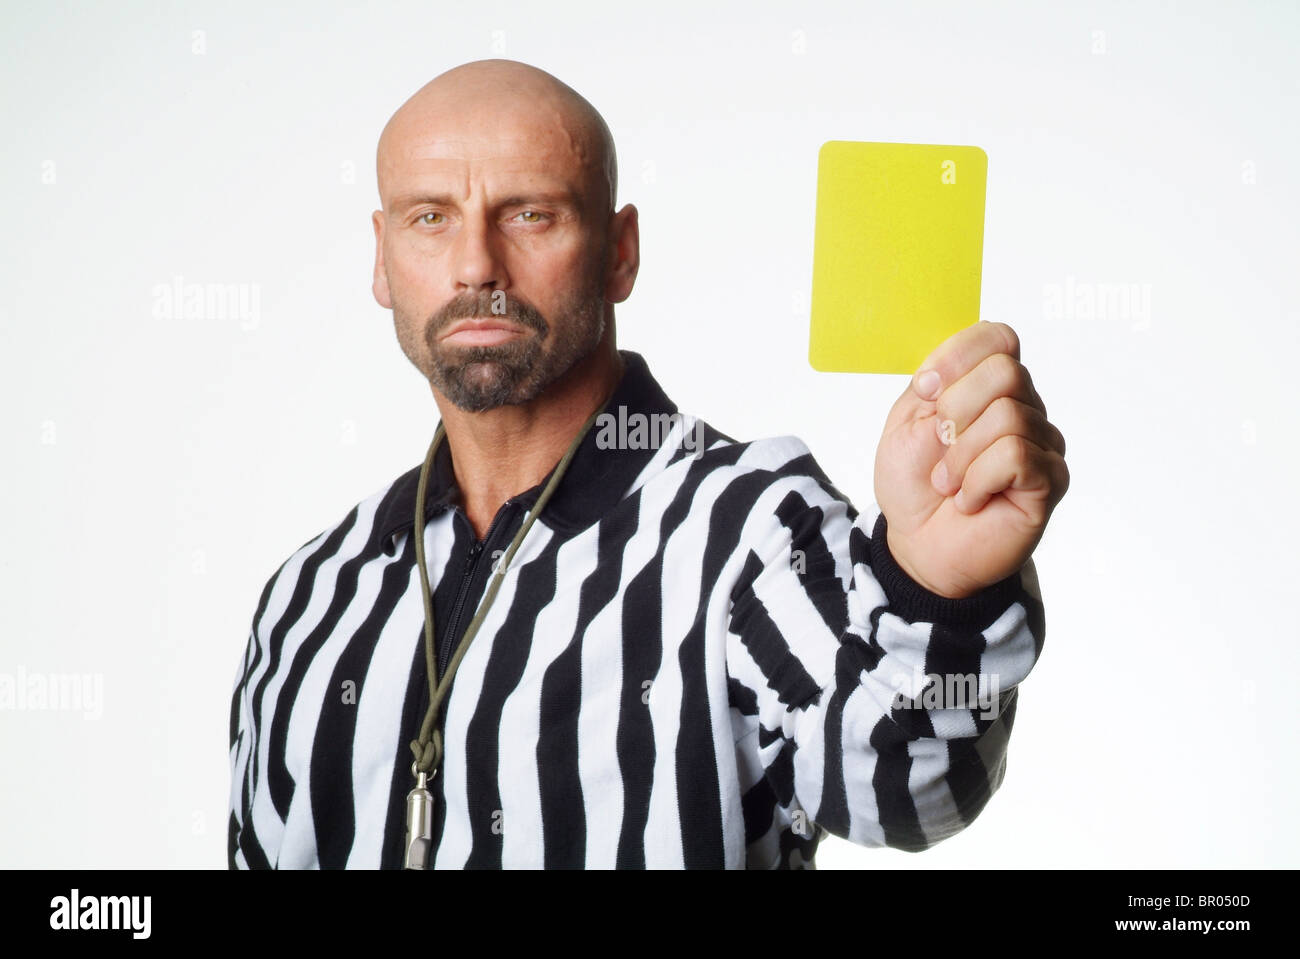 A soccer referee showing a yellow card Stock Photo